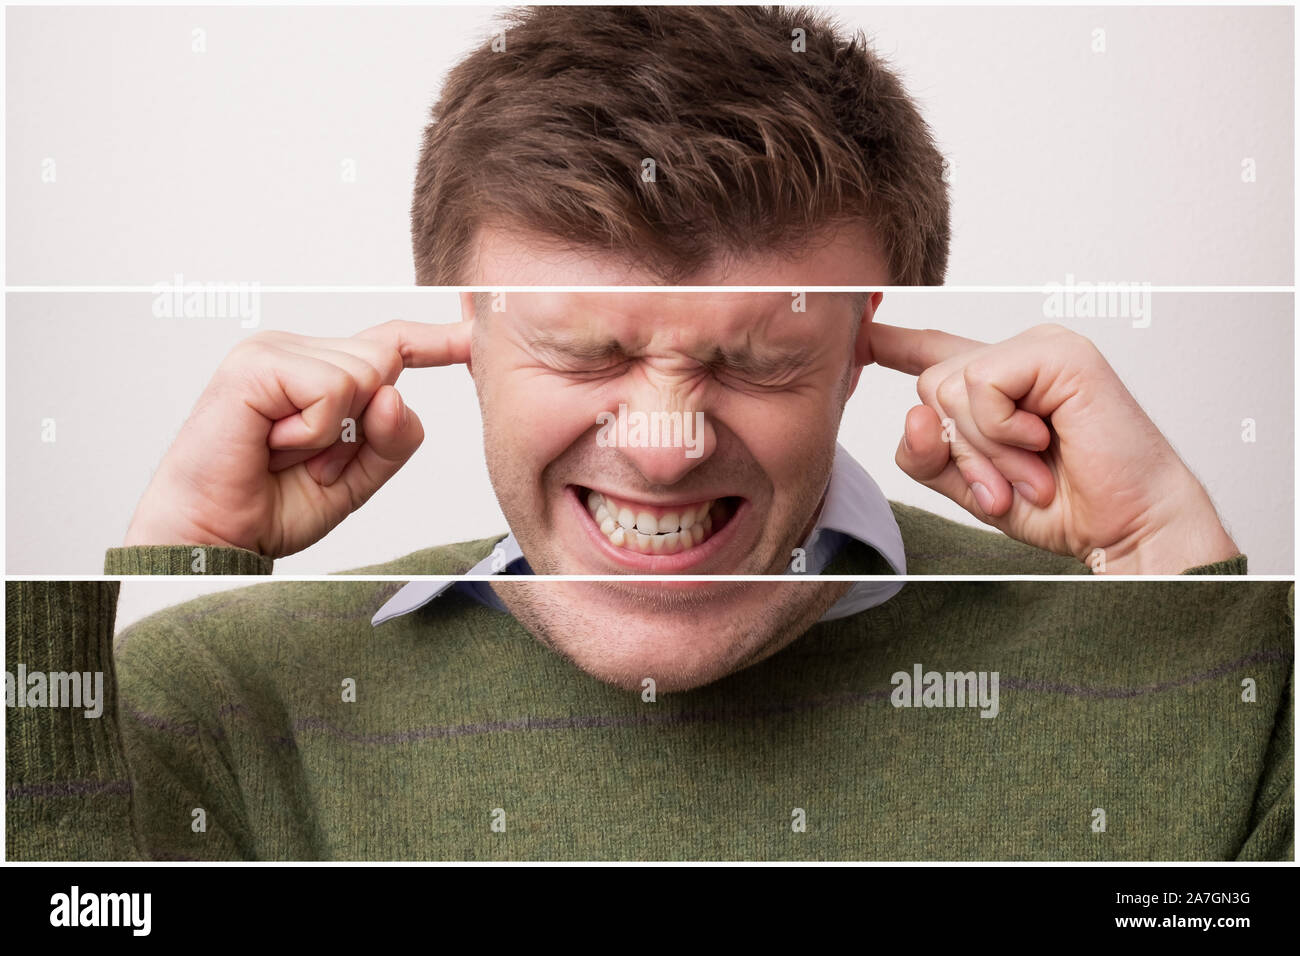 Triptych of stressed young man closing ears. Studio shot Stock Photo